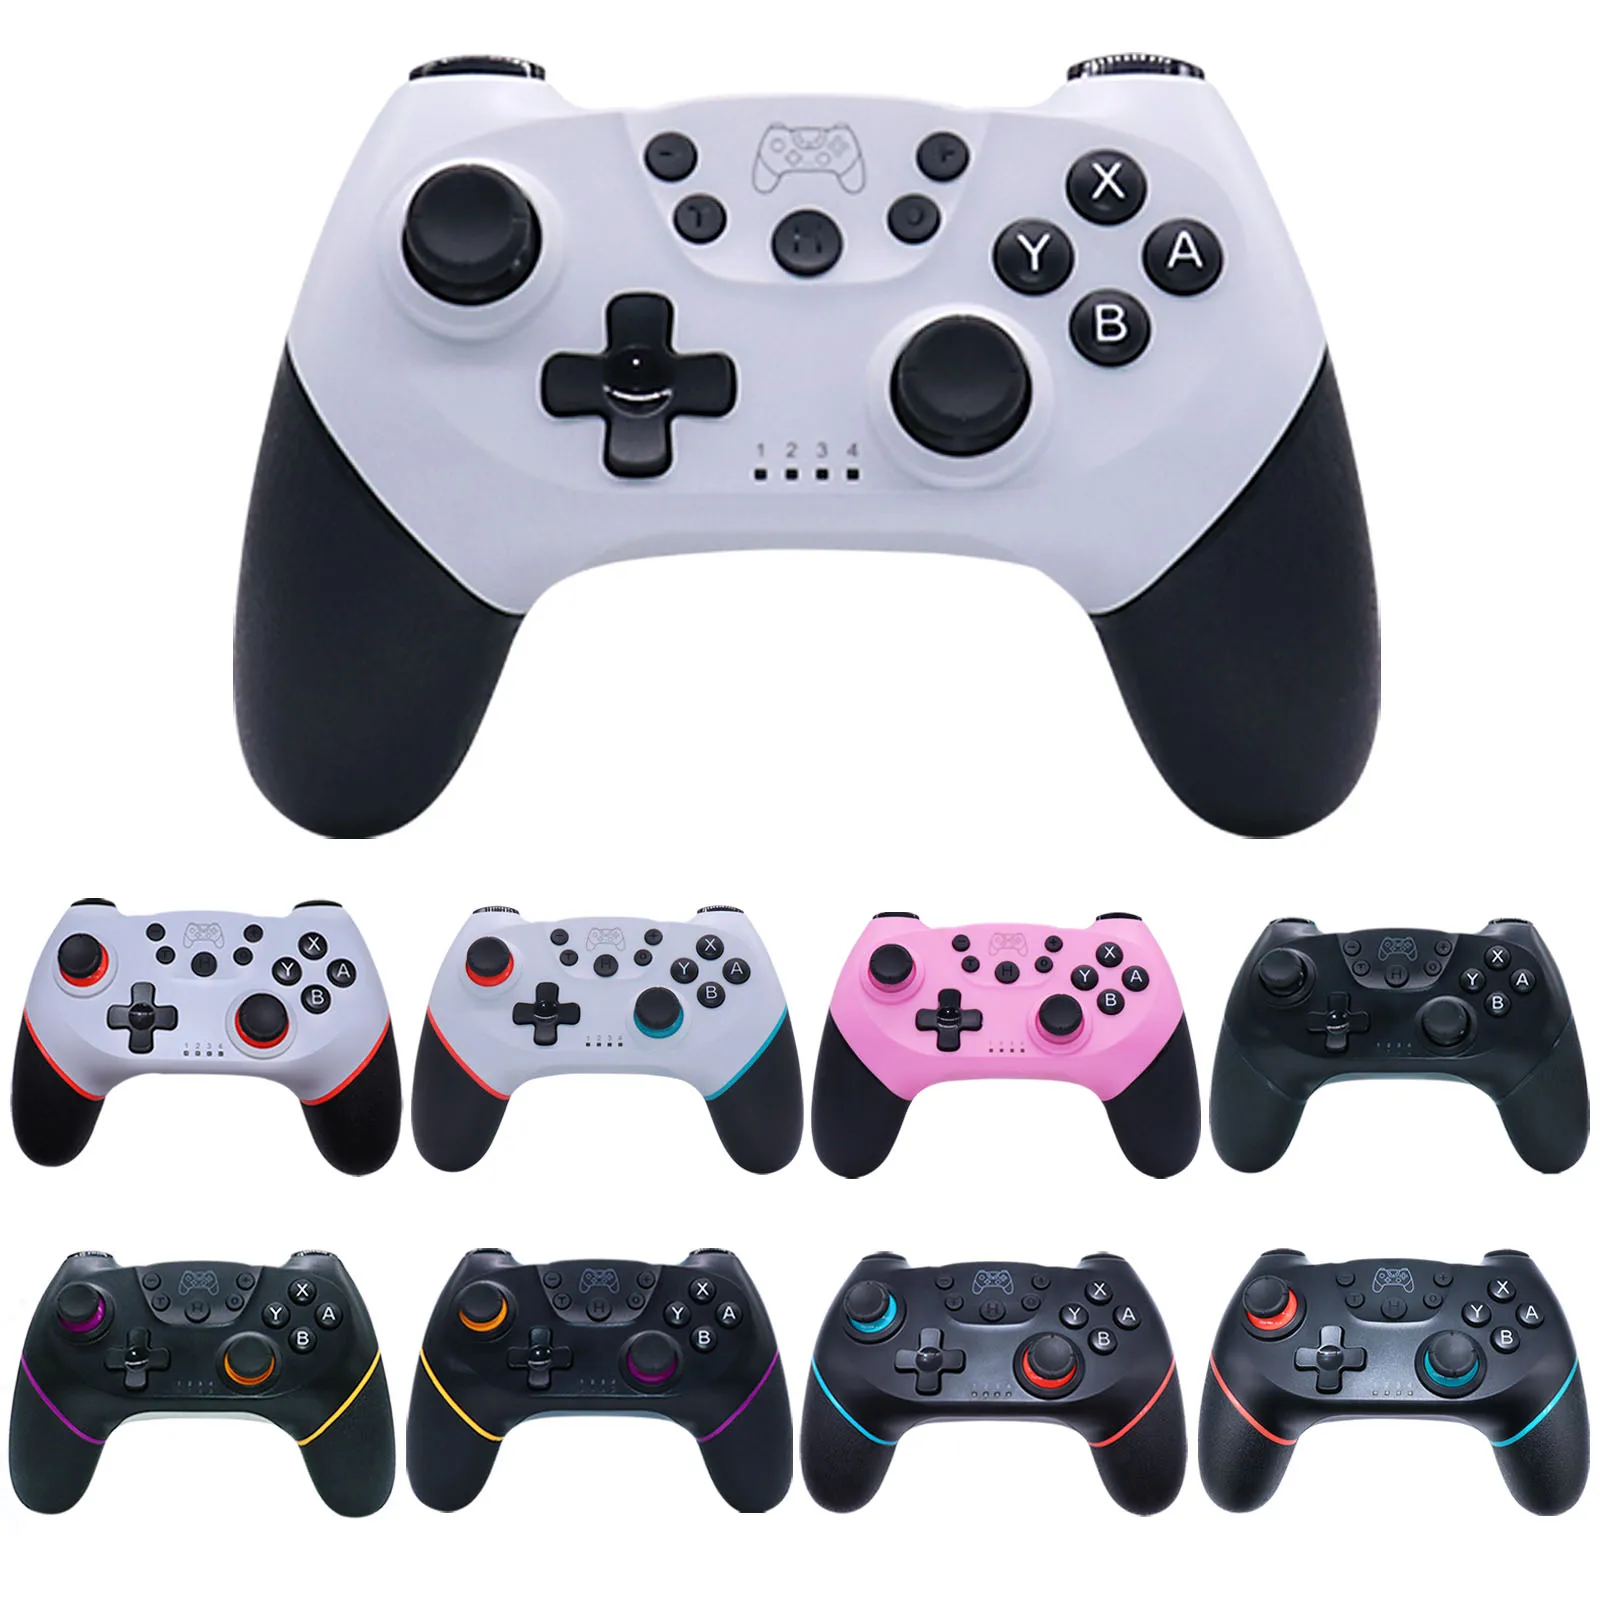 

New Cheap Wireless Blue tooth Gamepad With Six axes Turbo function for Switch Pro Game Controller Joypad Joystick, Multicolor